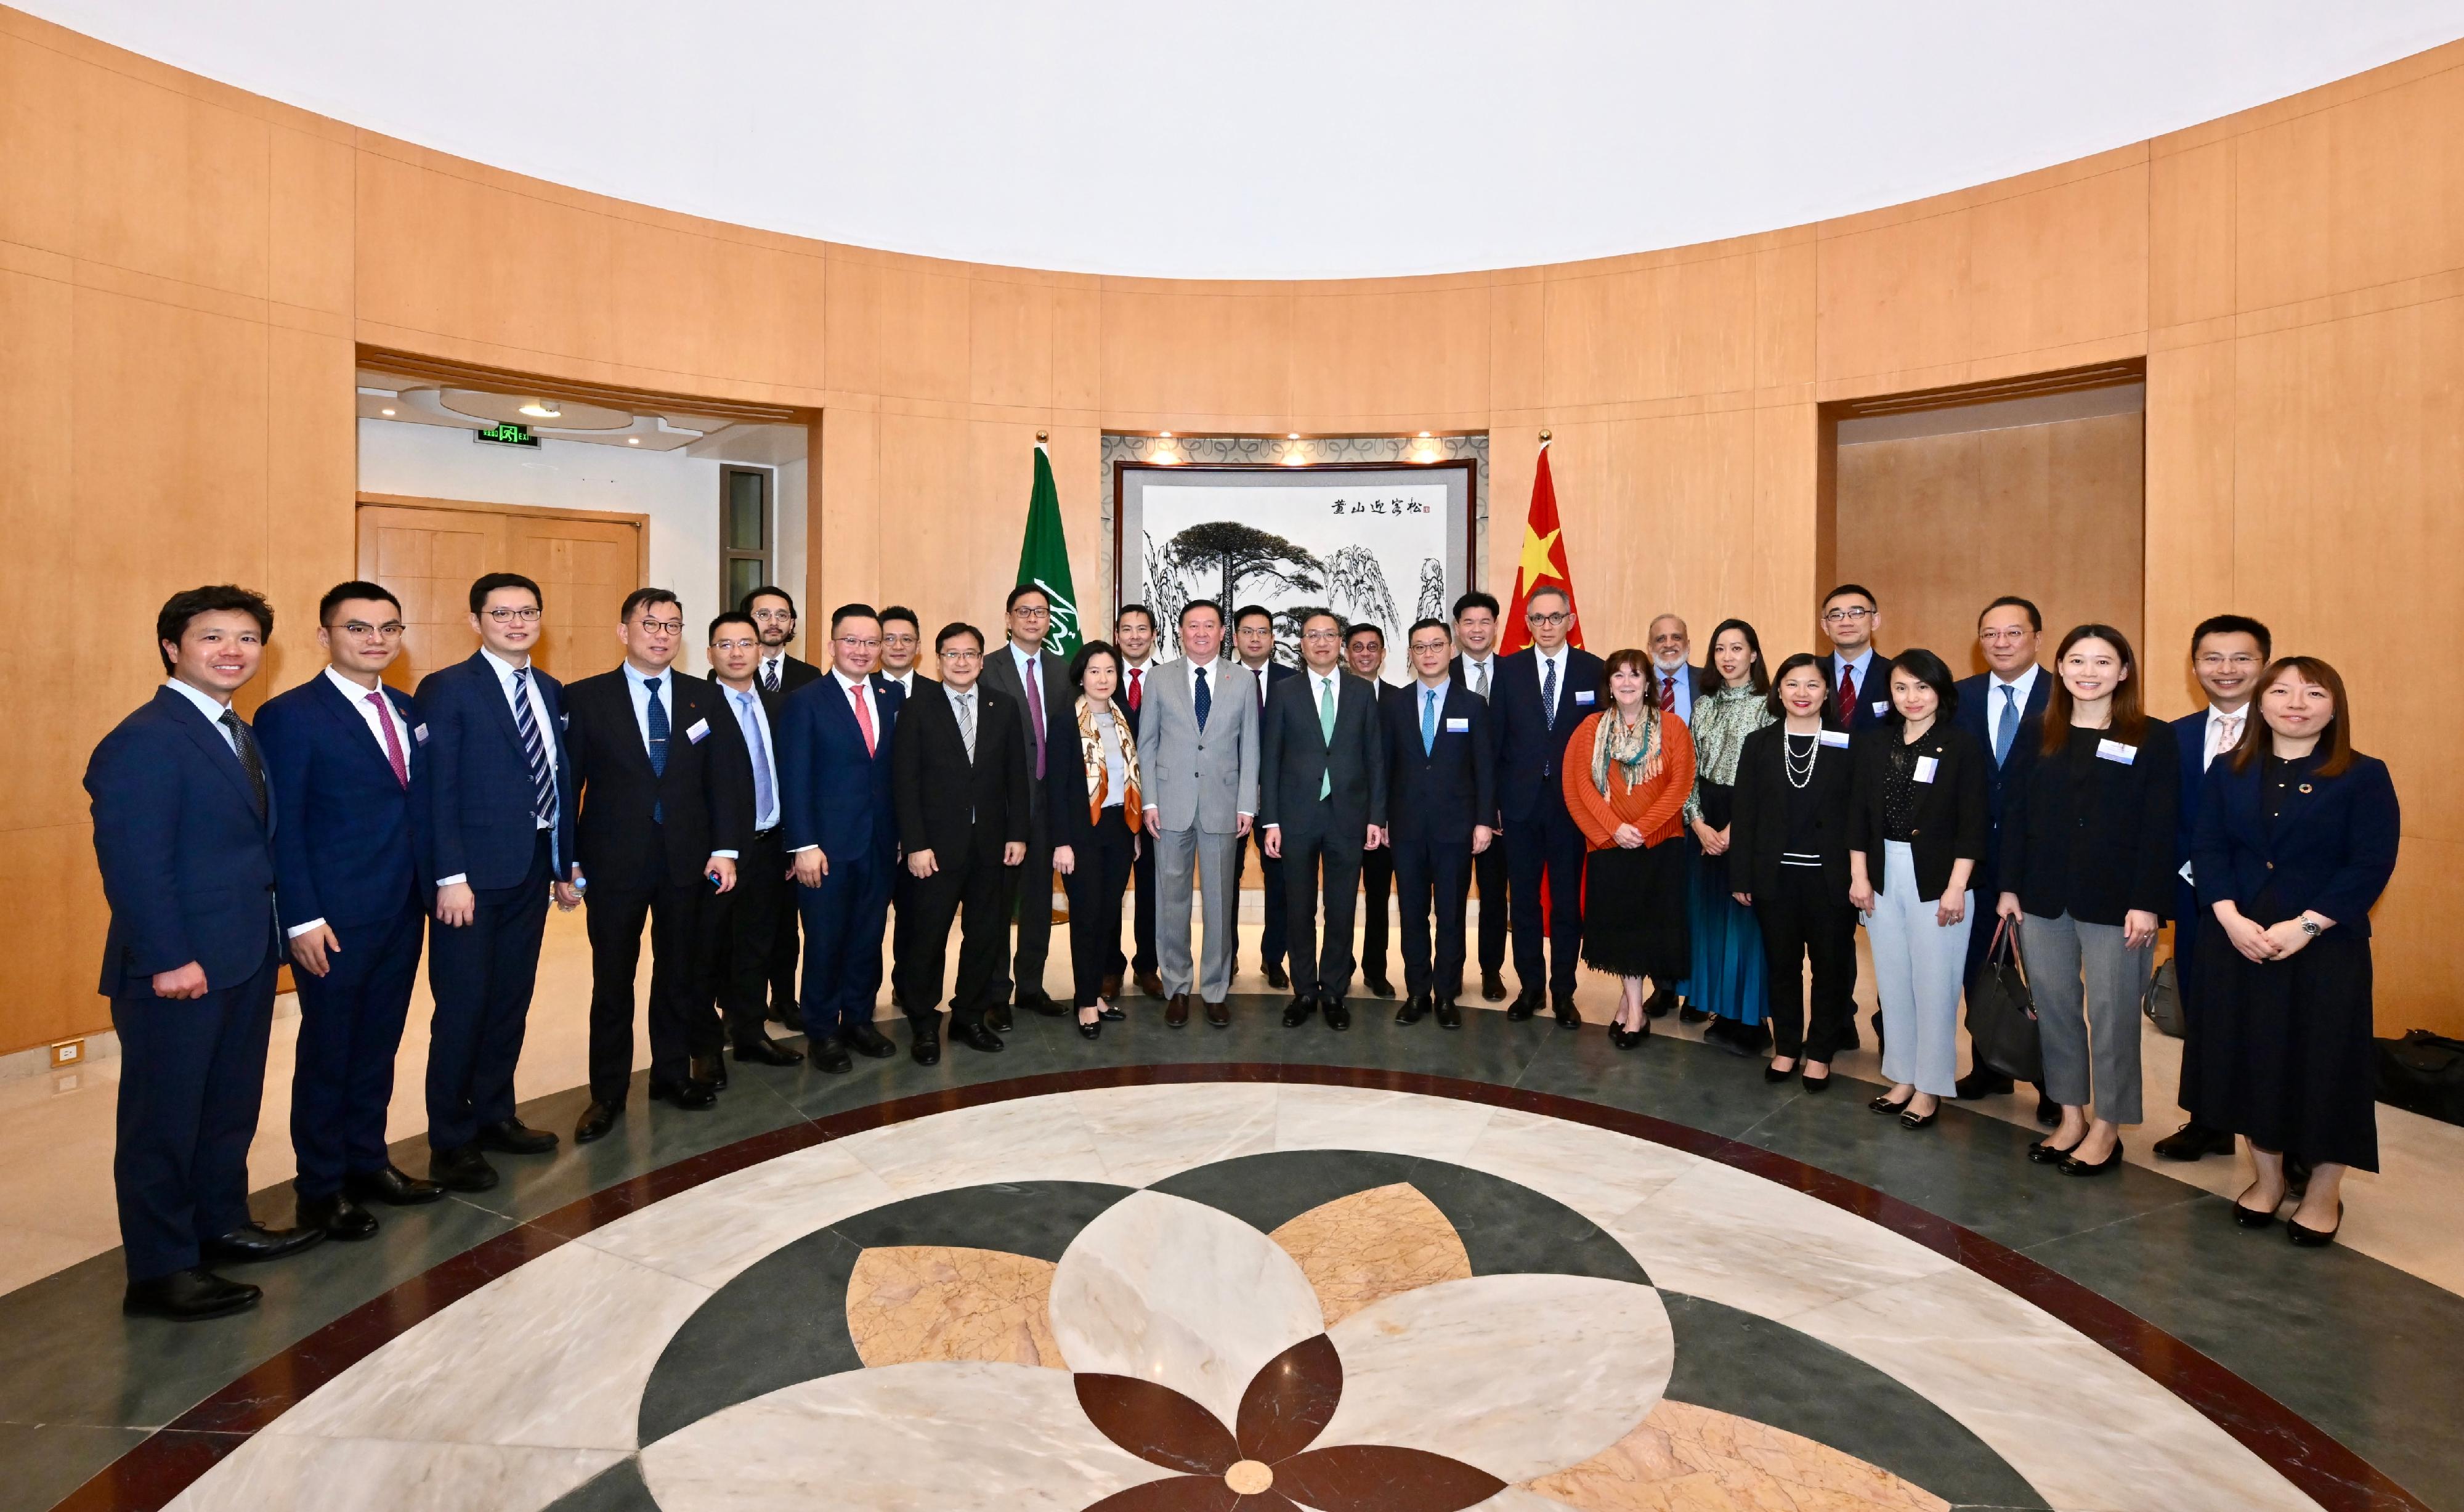 The Secretary for Justice, Mr Paul Lam, SC, arrived in Riyadh, Saudi Arabia, on May 19 (Riyadh time) with his about 30-person delegation, comprising representatives from the Law Society of Hong Kong, the Hong Kong Bar Association, the Hong Kong Exchanges and Clearing Limited, Invest Hong Kong and related sectors, and began a two-day visit to the city. Photo shows Mr Lam (centre) and his delegation with the Ambassador Extraordinary and Plenipotentiary of the People's Republic of China to the Kingdom of Saudi Arabia, Mr Chang Hua (13th left).